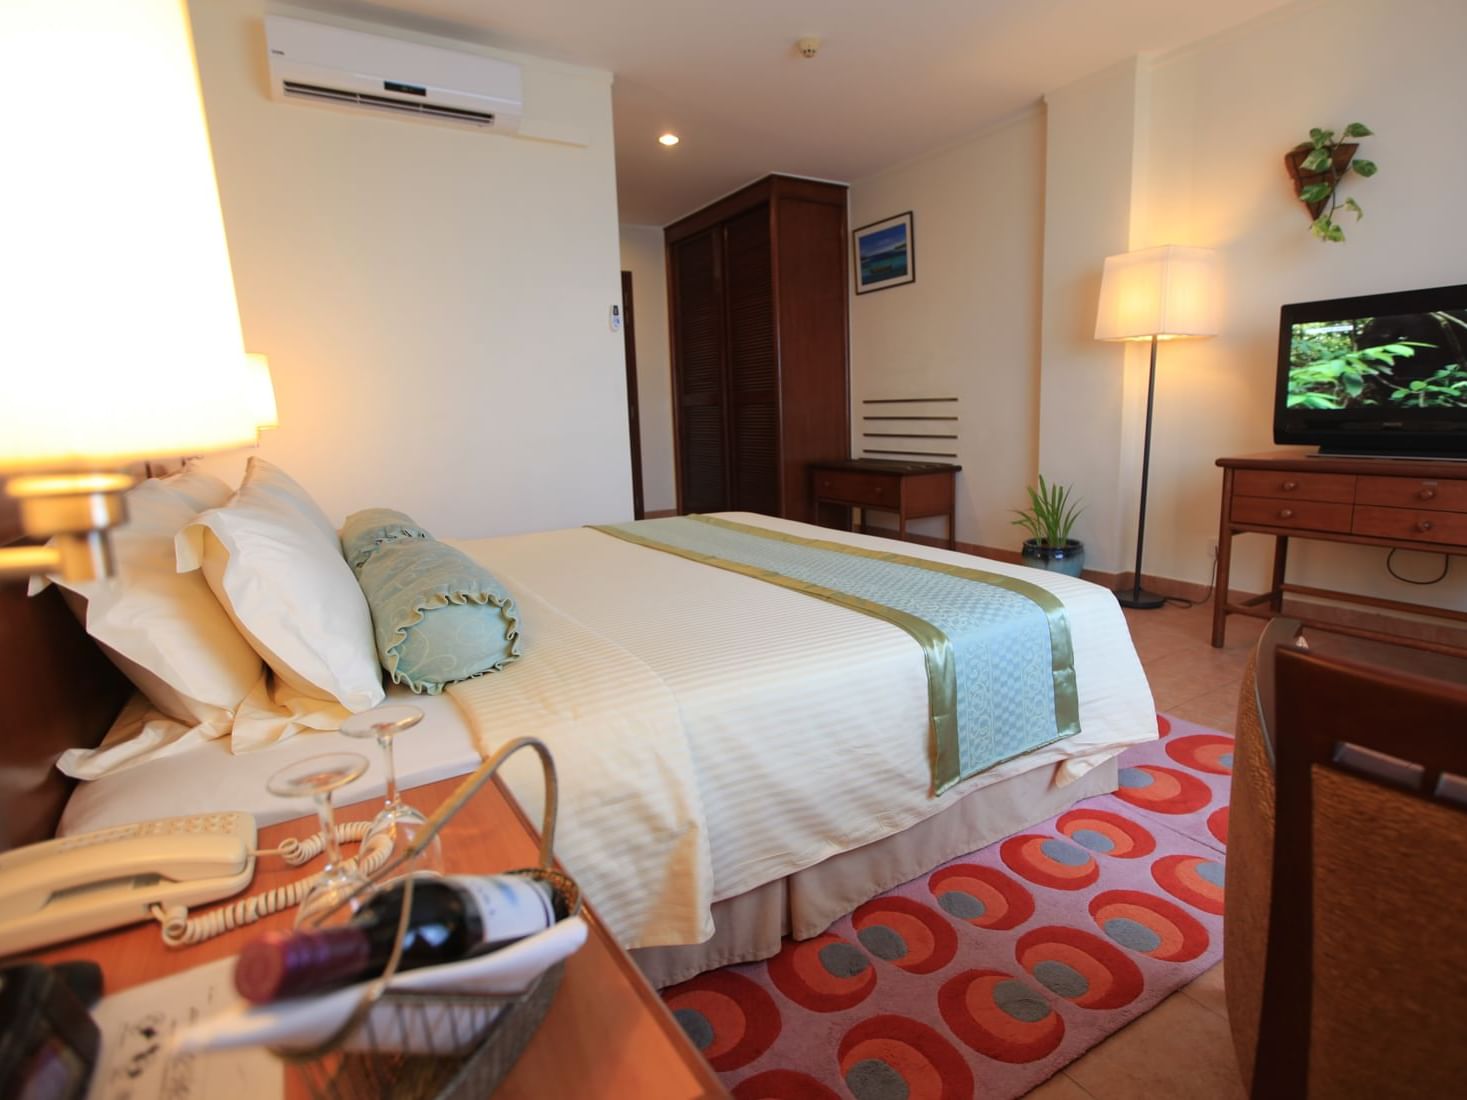 Superior Room at Hulhule Island Hotel in Malé, Maldives